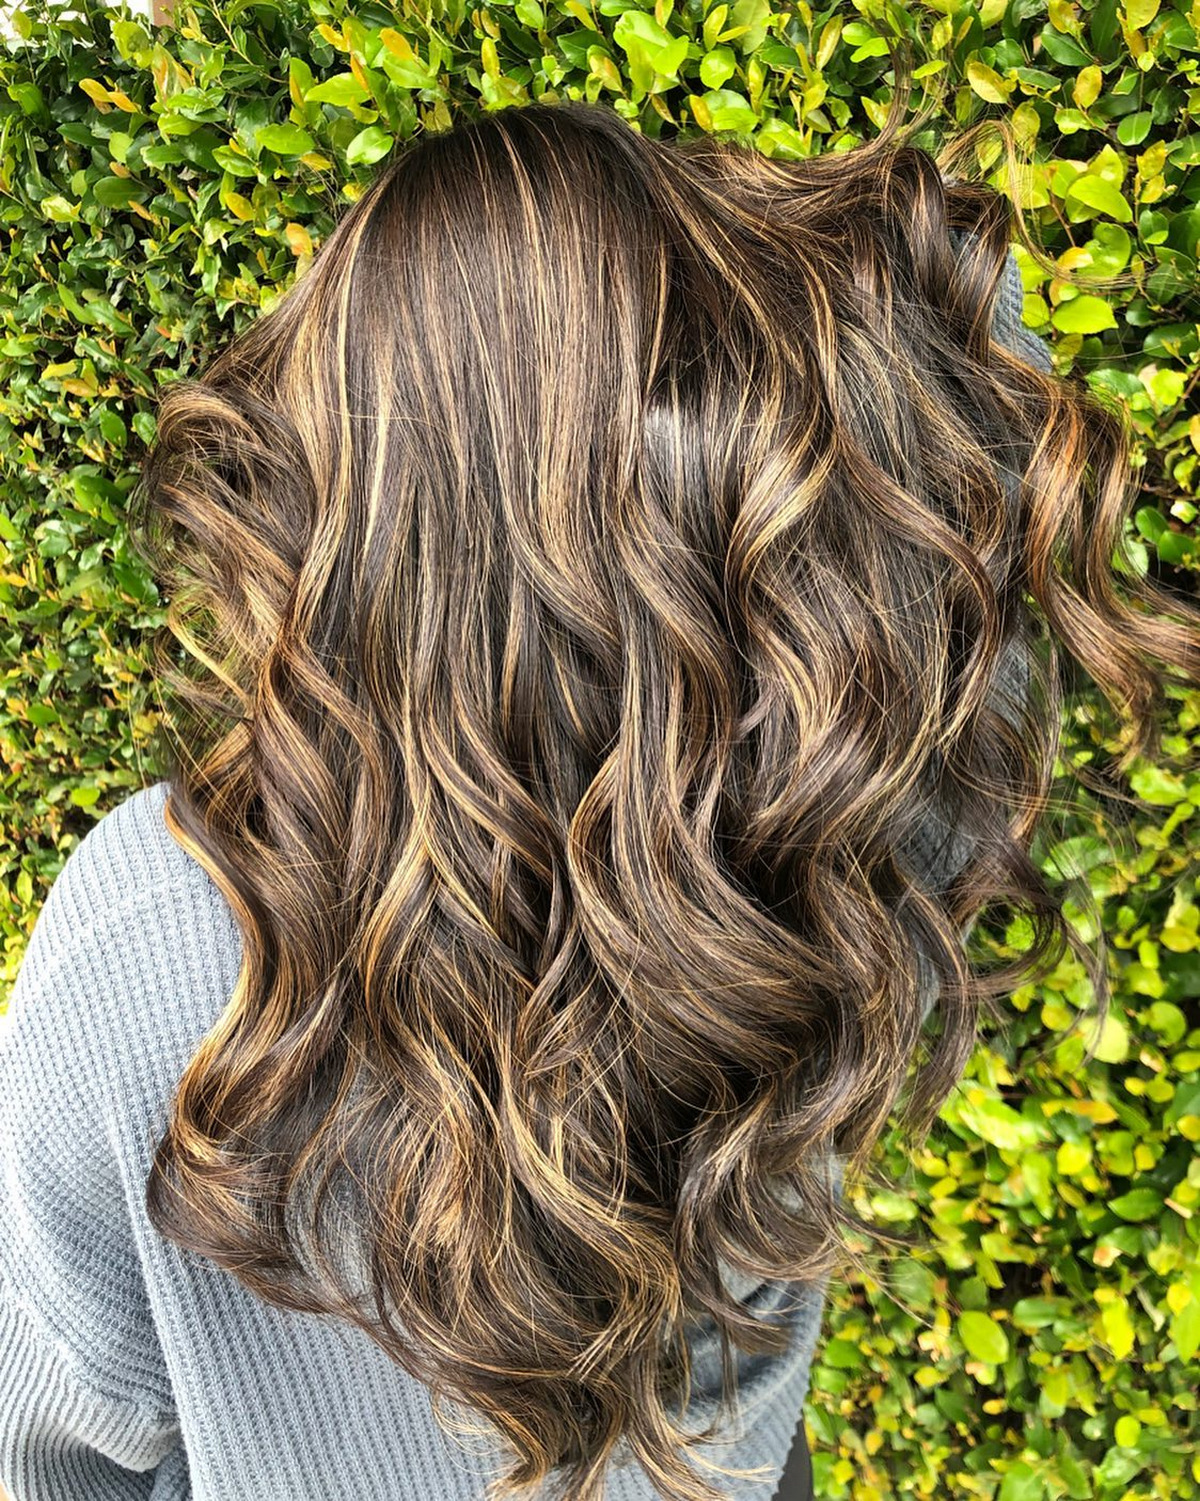  Long Layered Haircut With Sunkissed Highlights